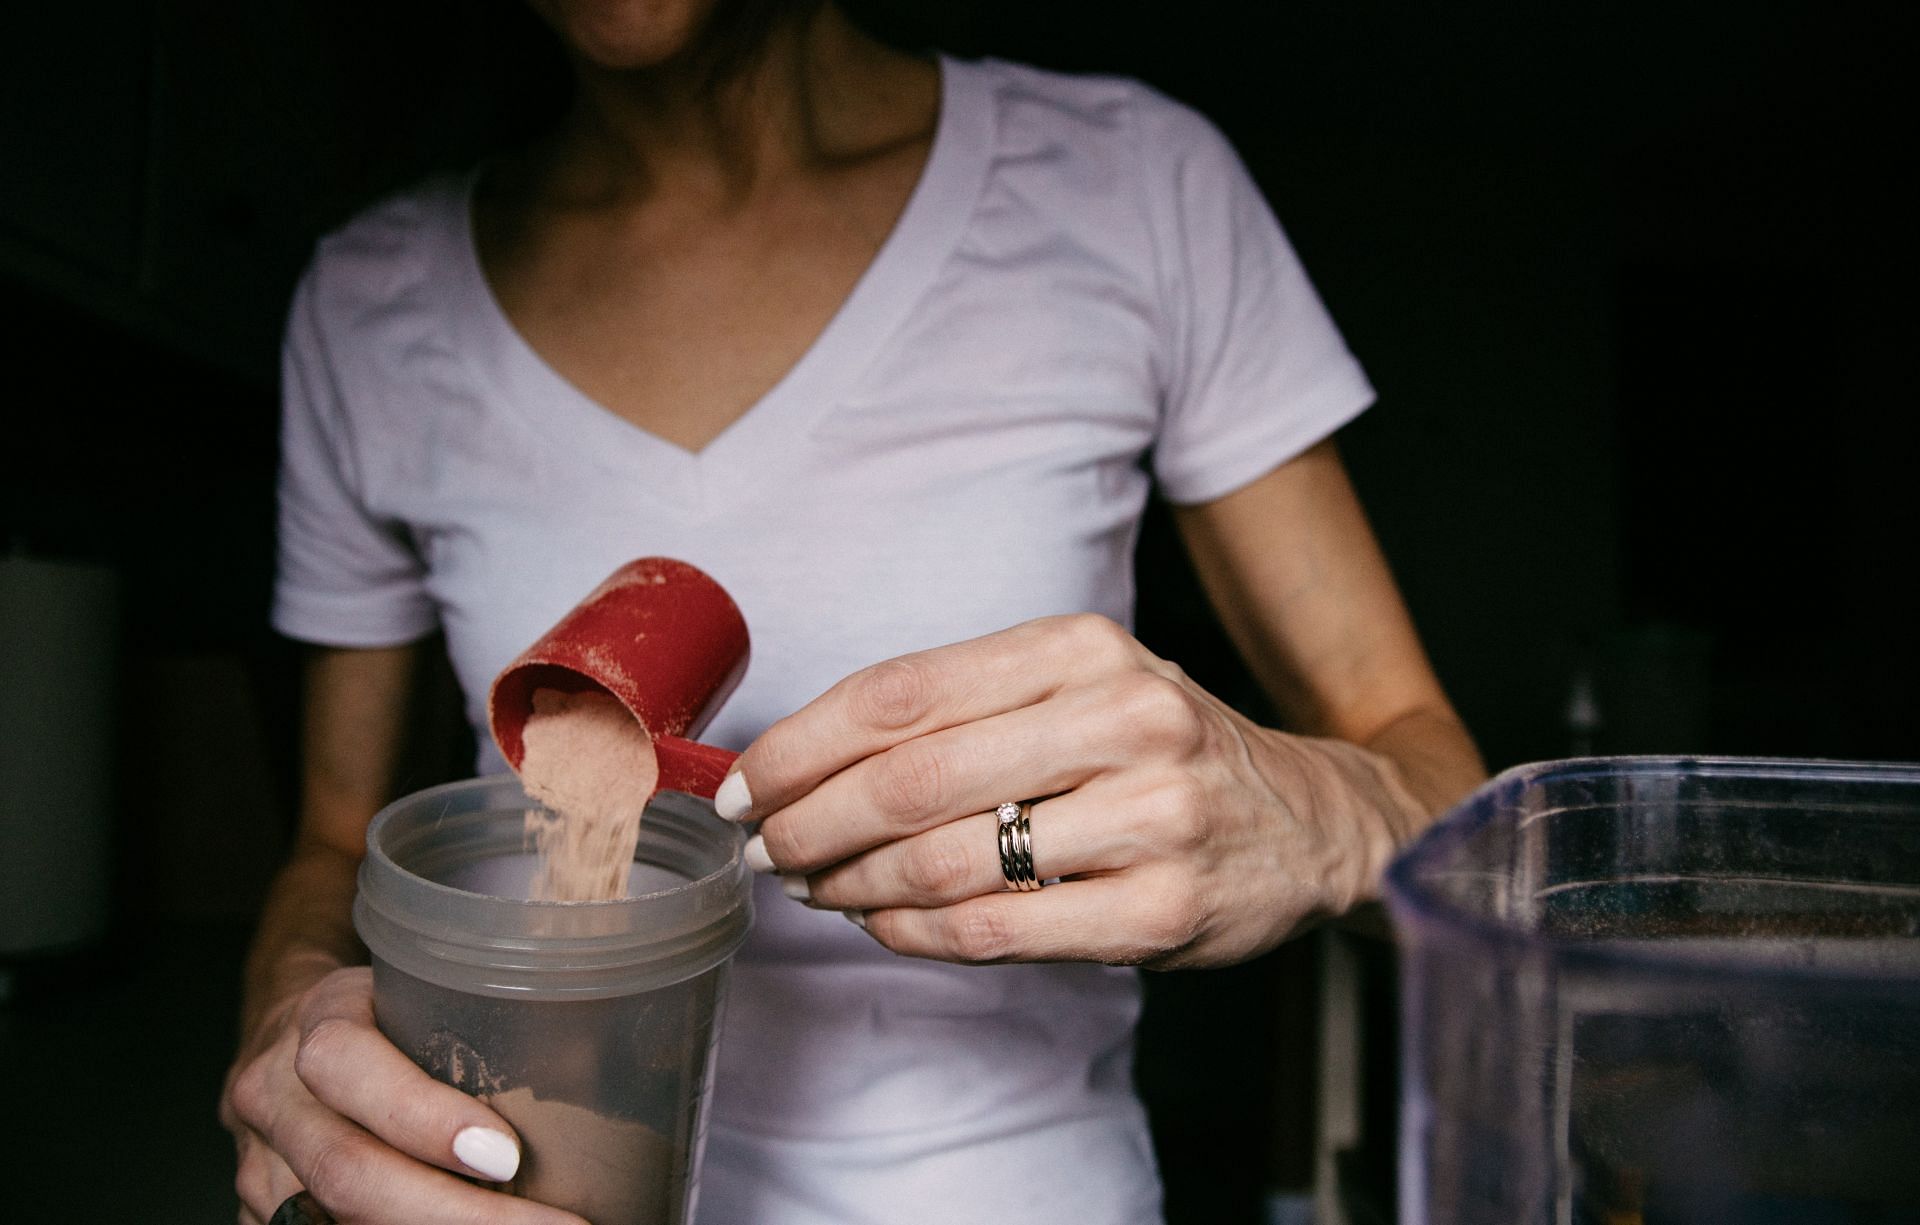 Meal replacement products include shakes, cereals and bars (Image via Unsplash/Kelly Sikkema)